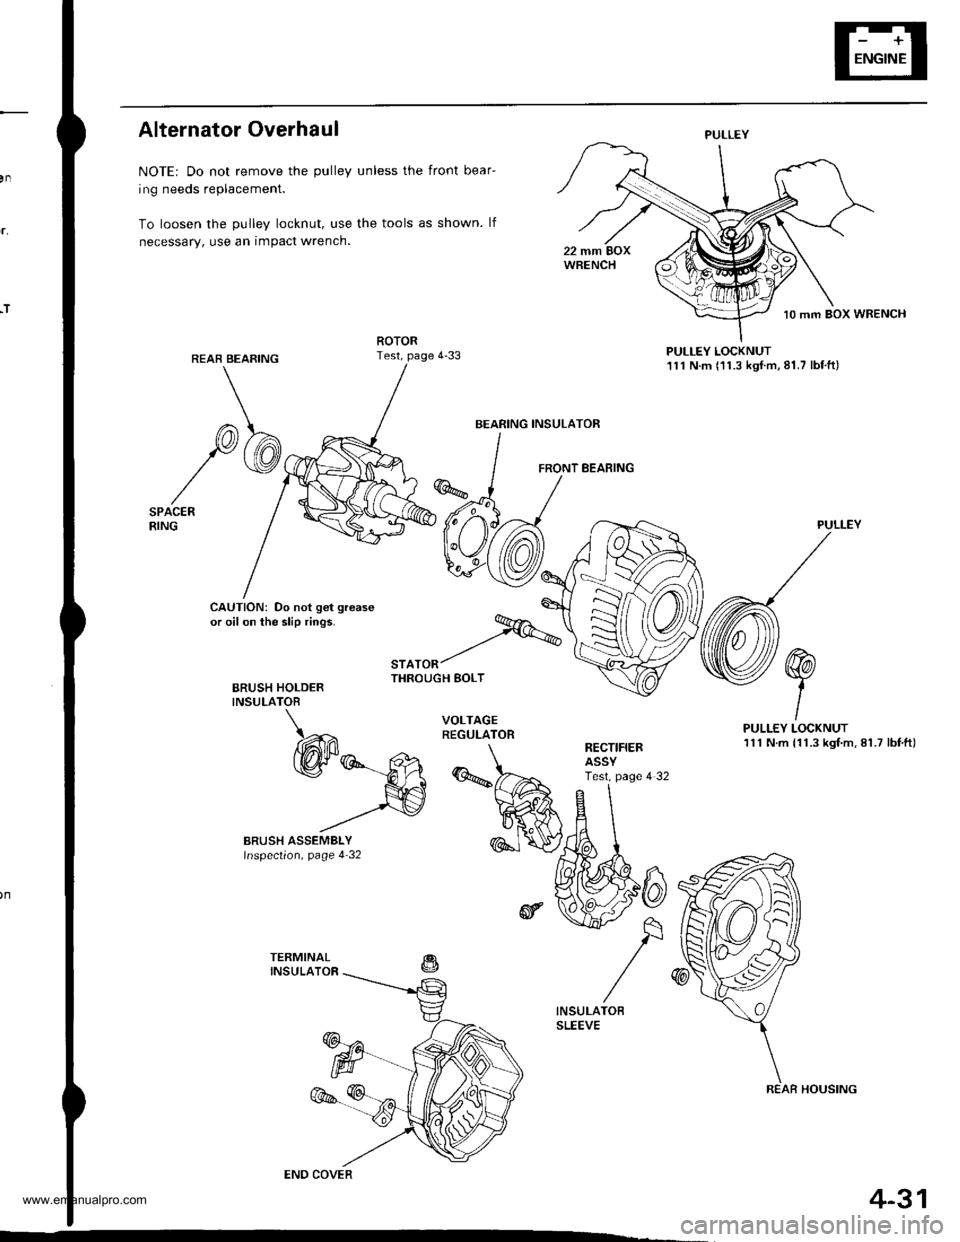 HONDA CR-V 1999 RD1-RD3 / 1.G Service Manual 
,T
Alternator Overhaul
NOTE: Do not remove the pulley unless the front bear-
ing needs replacement.
To loosen the pulley locknut, use the tools as shown. lf
necessary, use an impact wrench.
PULLEY LO